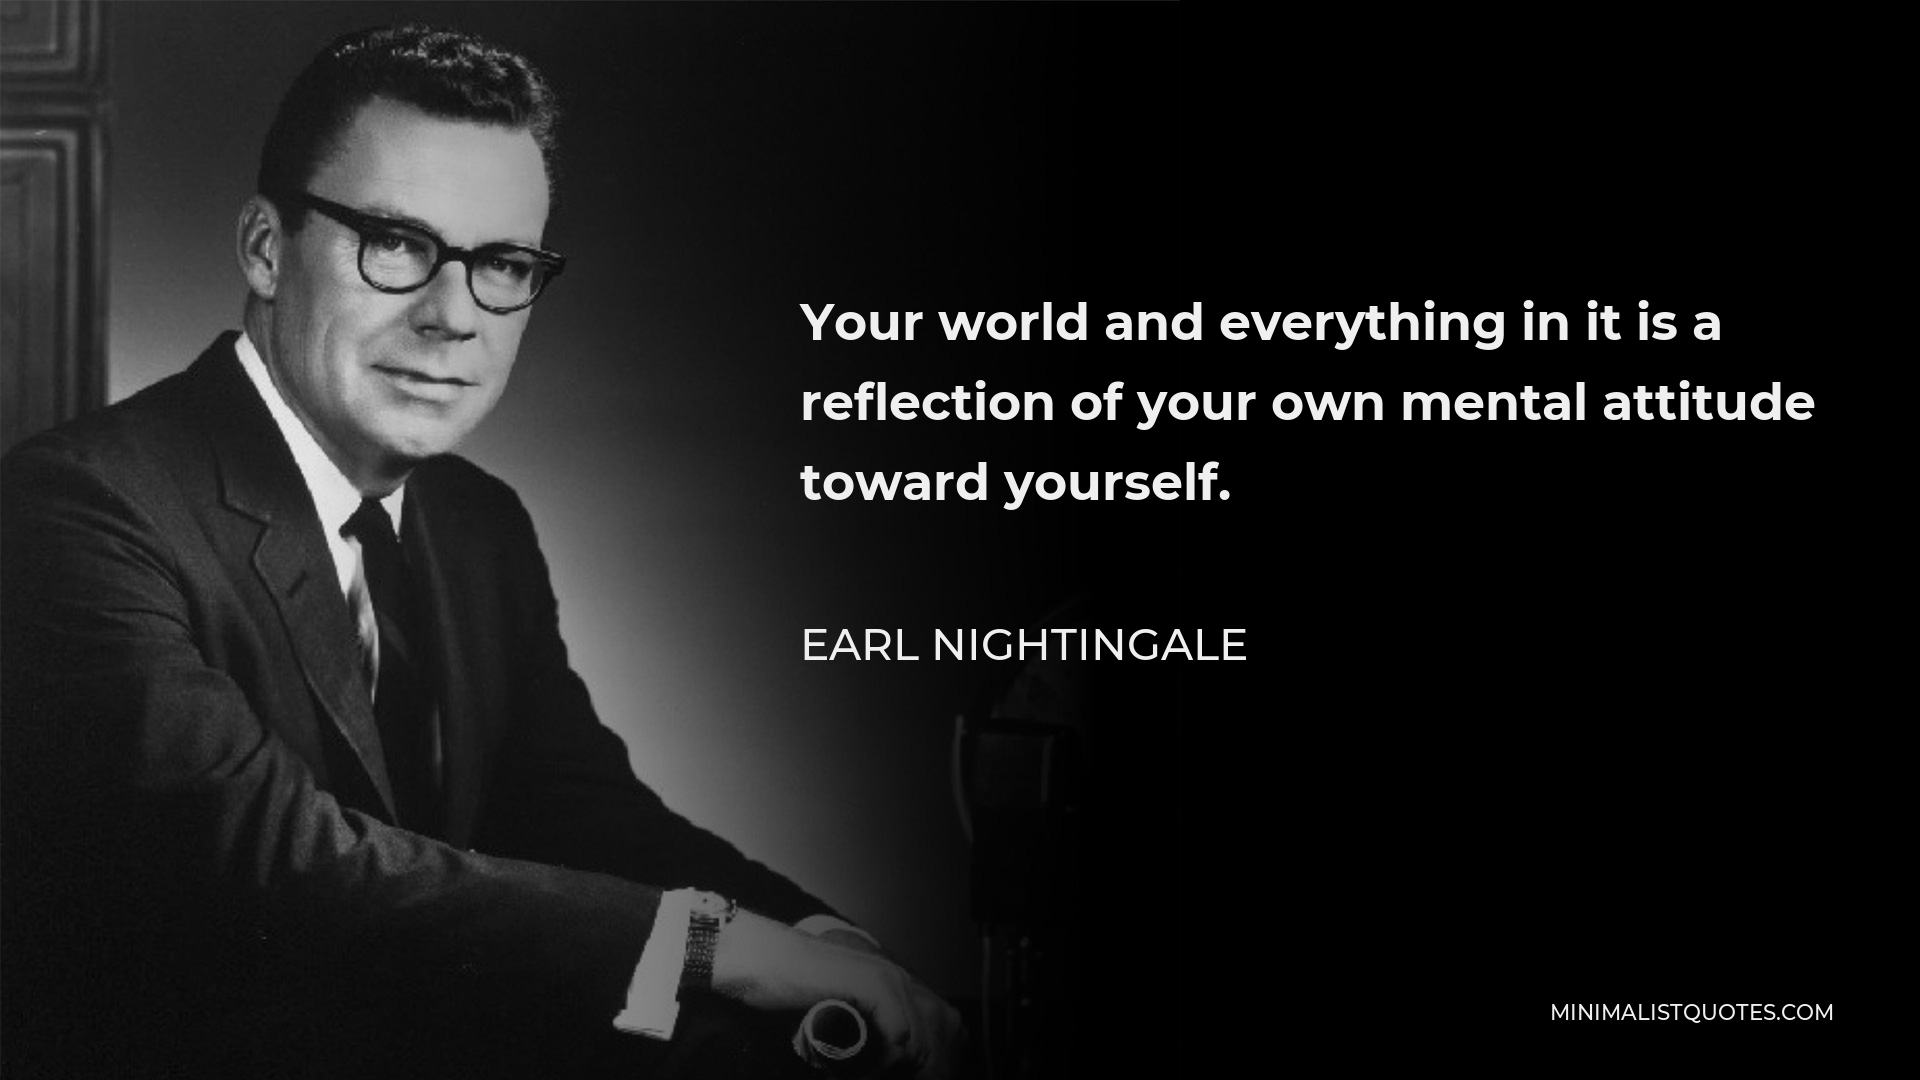 Earl Nightingale Quote - Your world and everything in it is a reflection of your own mental attitude toward yourself.